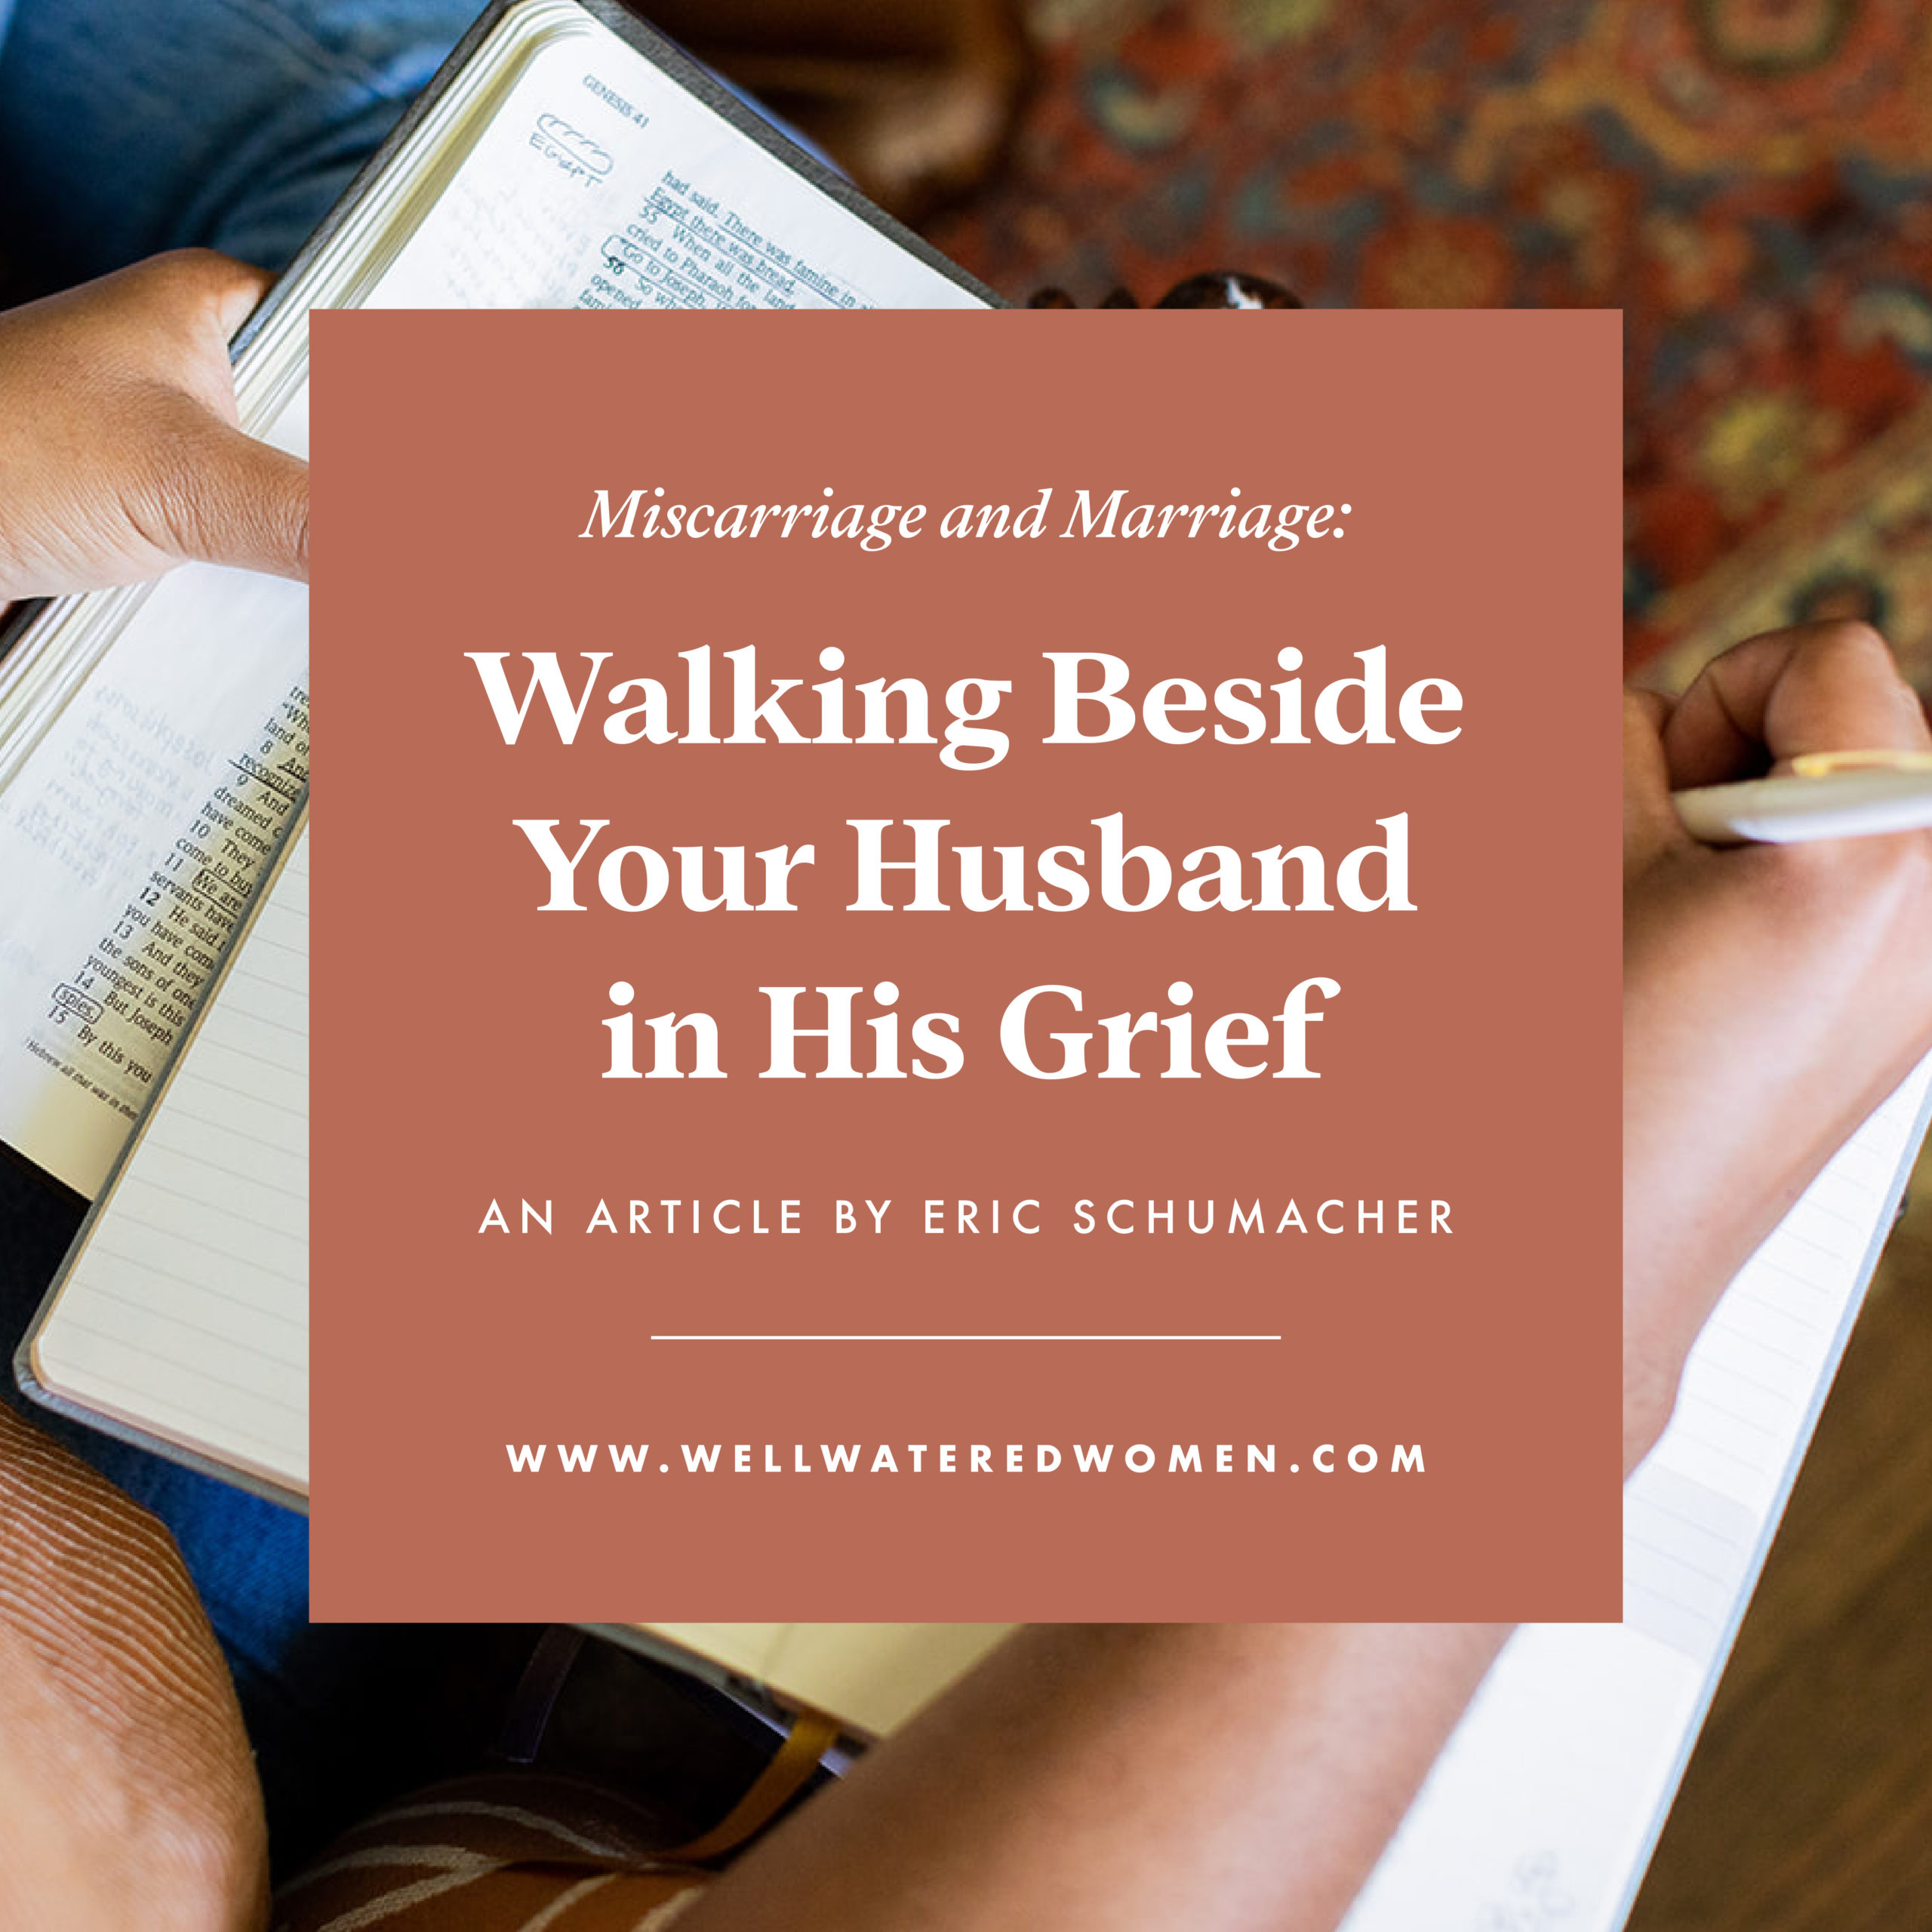 Miscarriage and Marriage - Walking Beside Your Husband in His Grief - An Article by Eric Schumacher